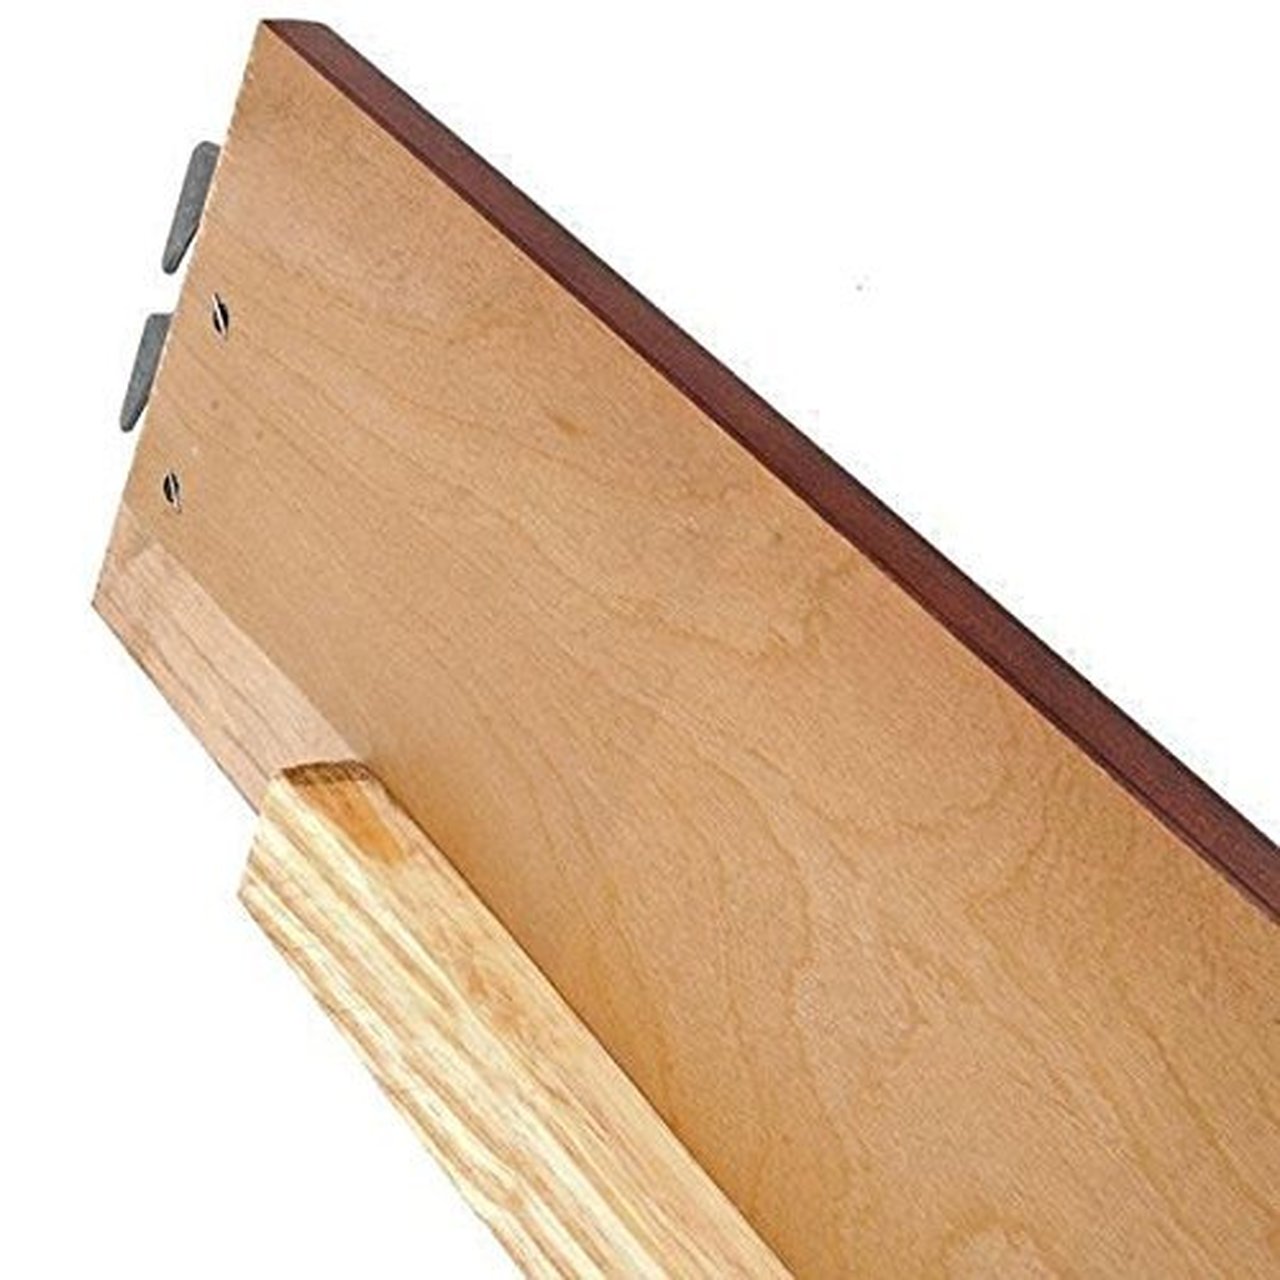 bed rails for twin bed wood